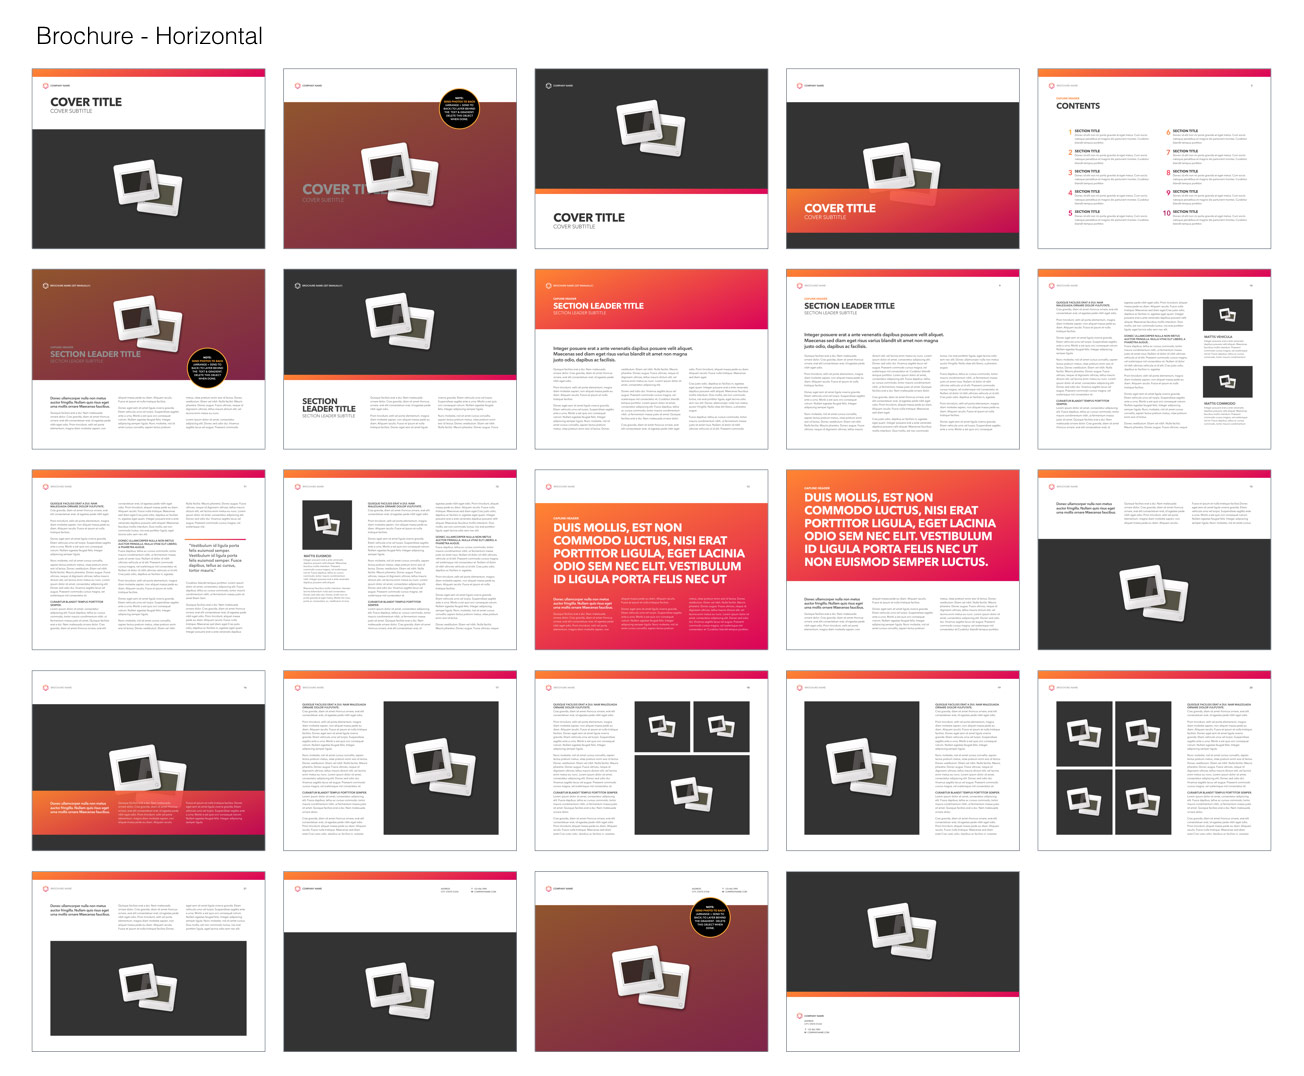 Hyperion for Pages - Horizontal Brochure